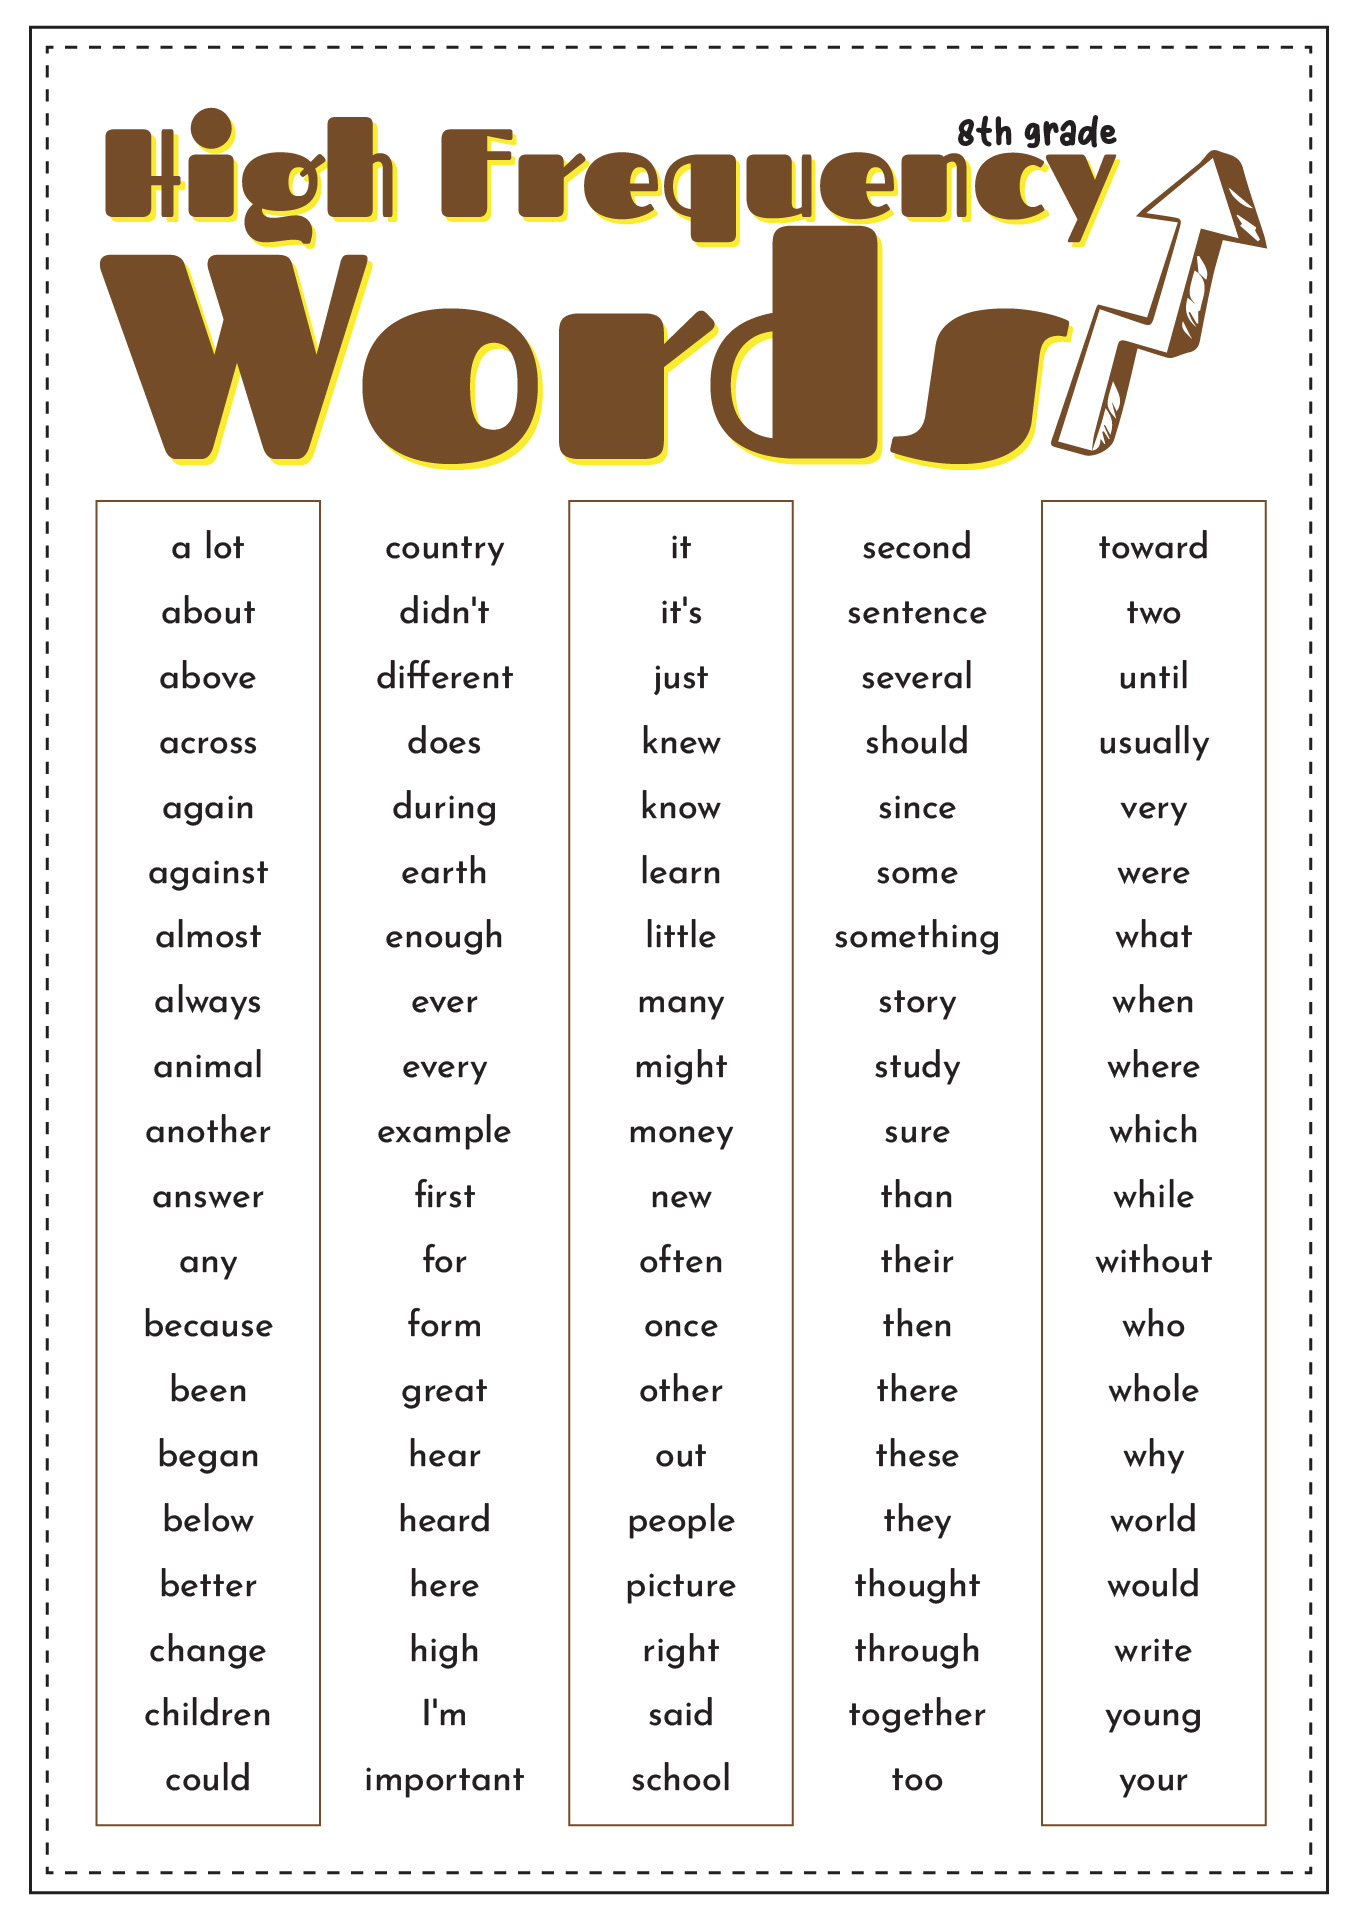 8th Grade High Frequency Words Image